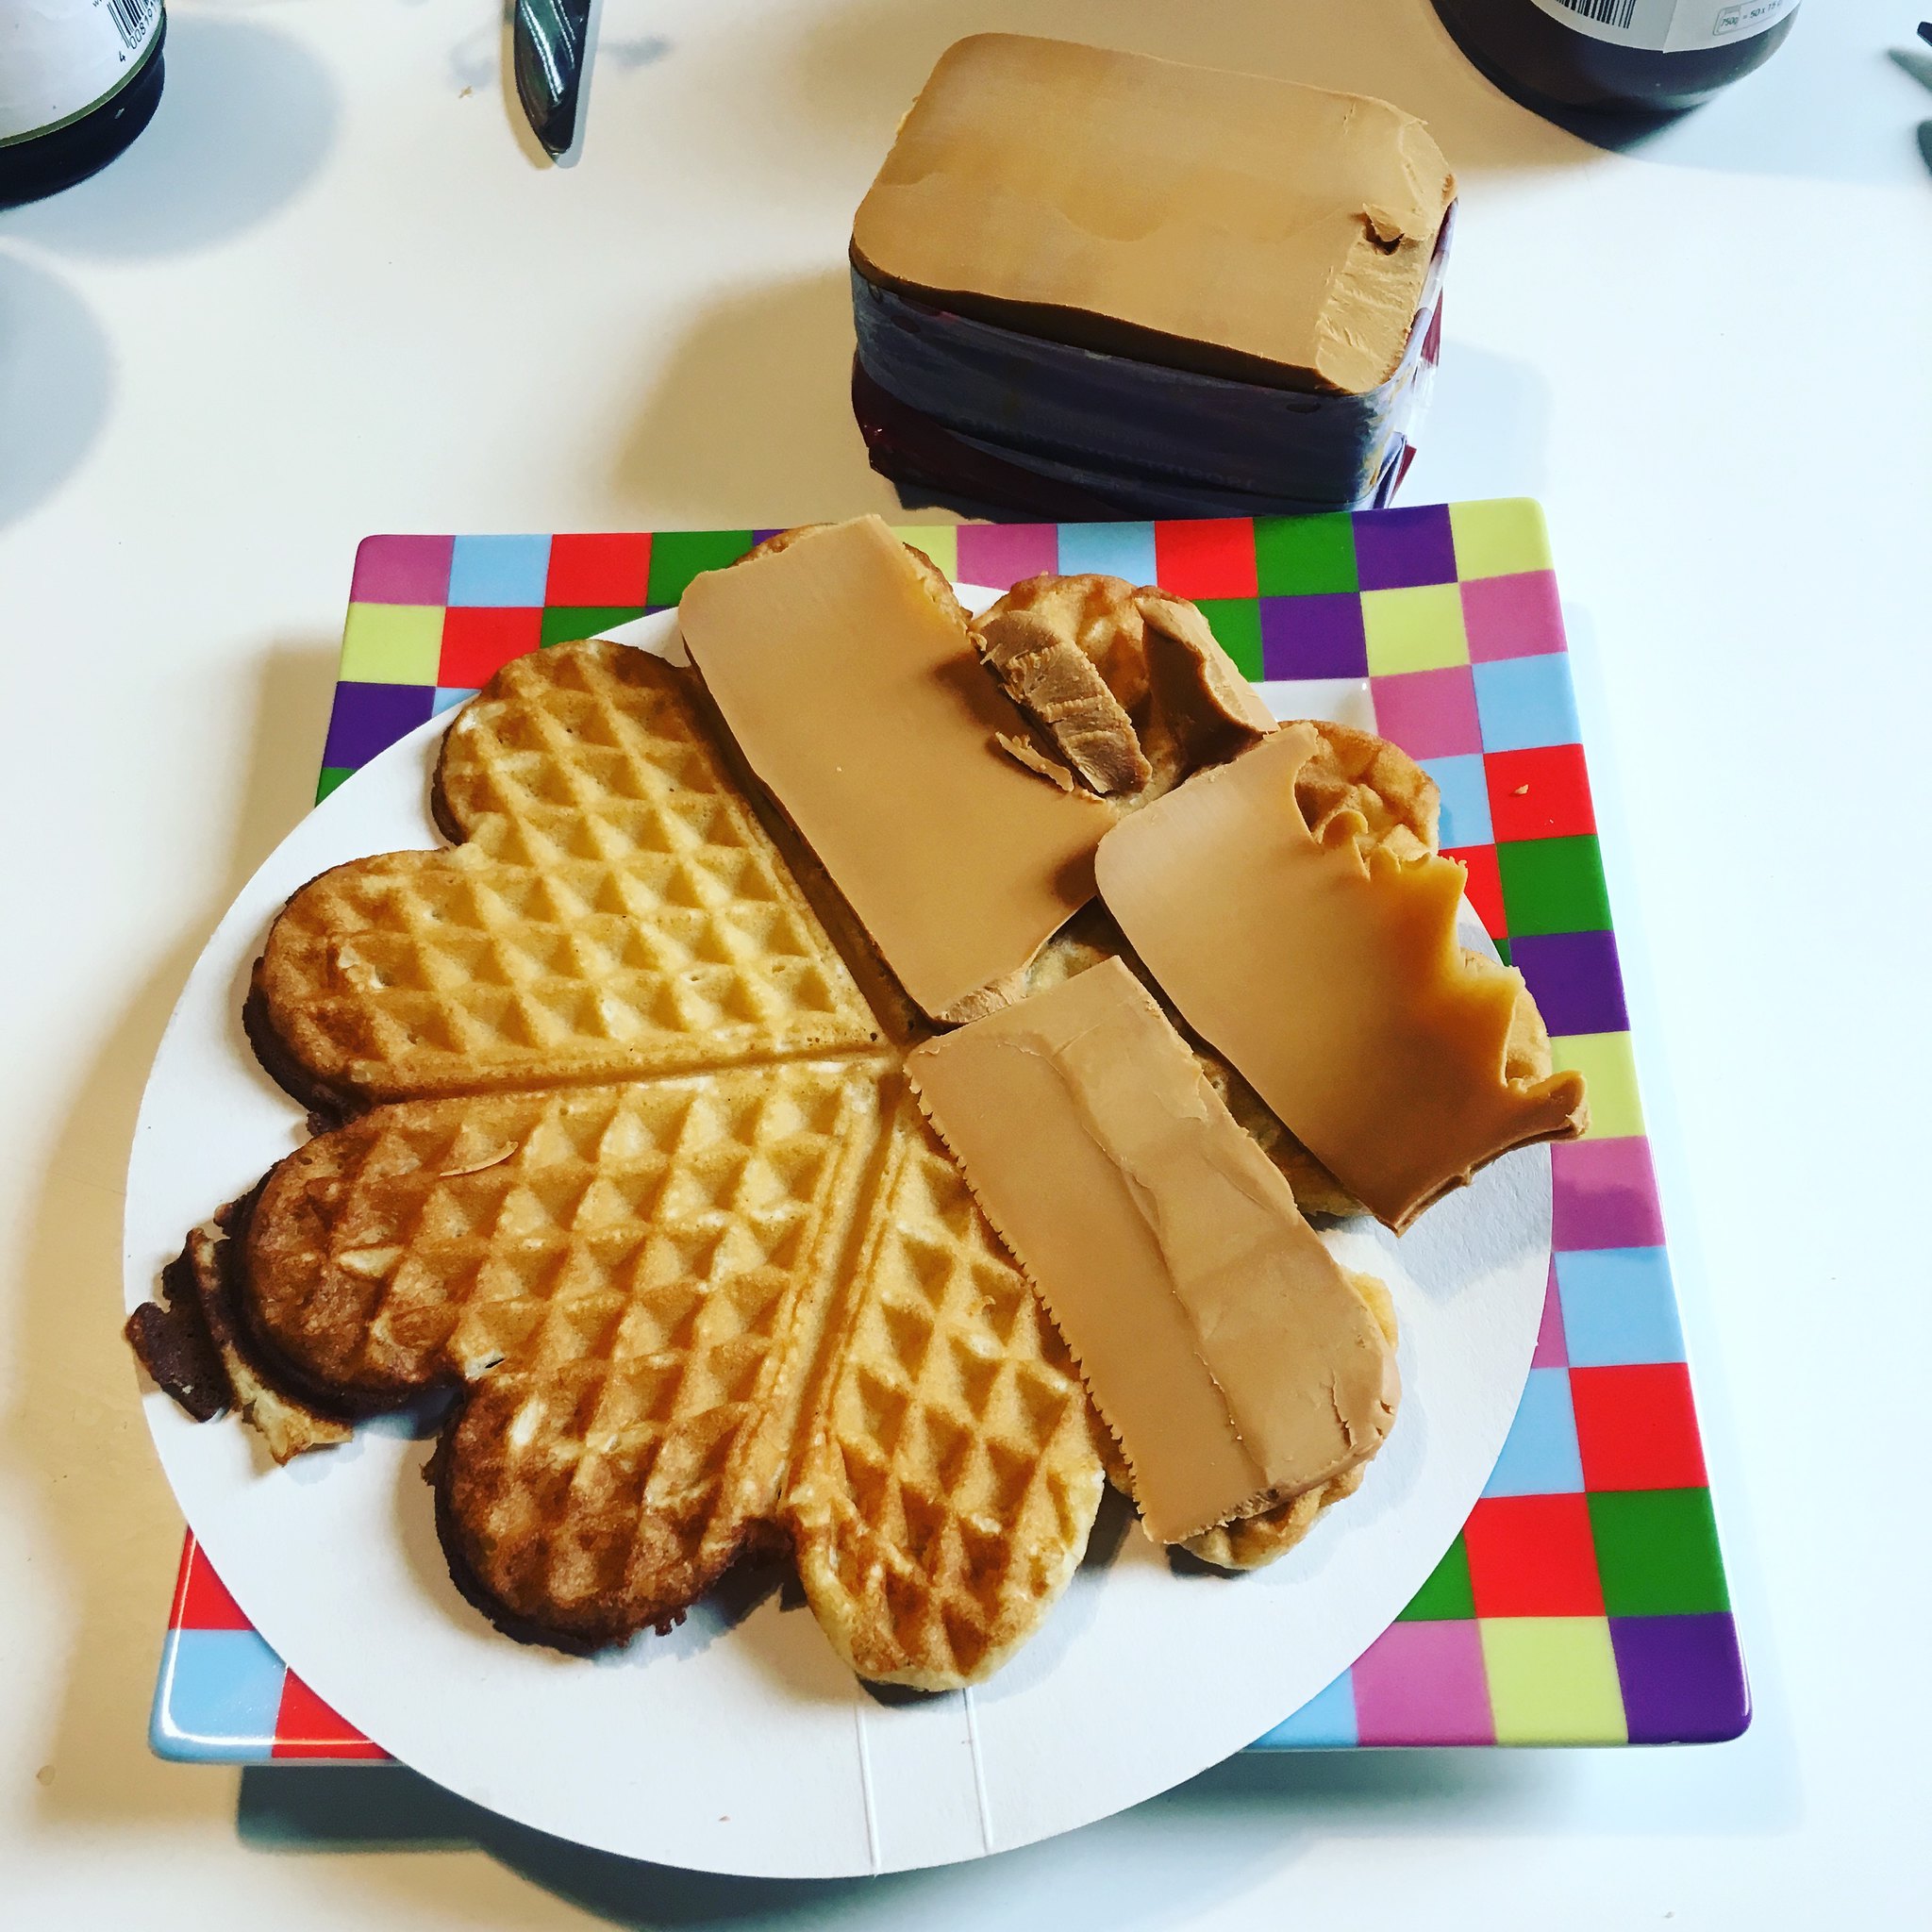 Brunost – A Delicious Valorization of Whey – Part 1